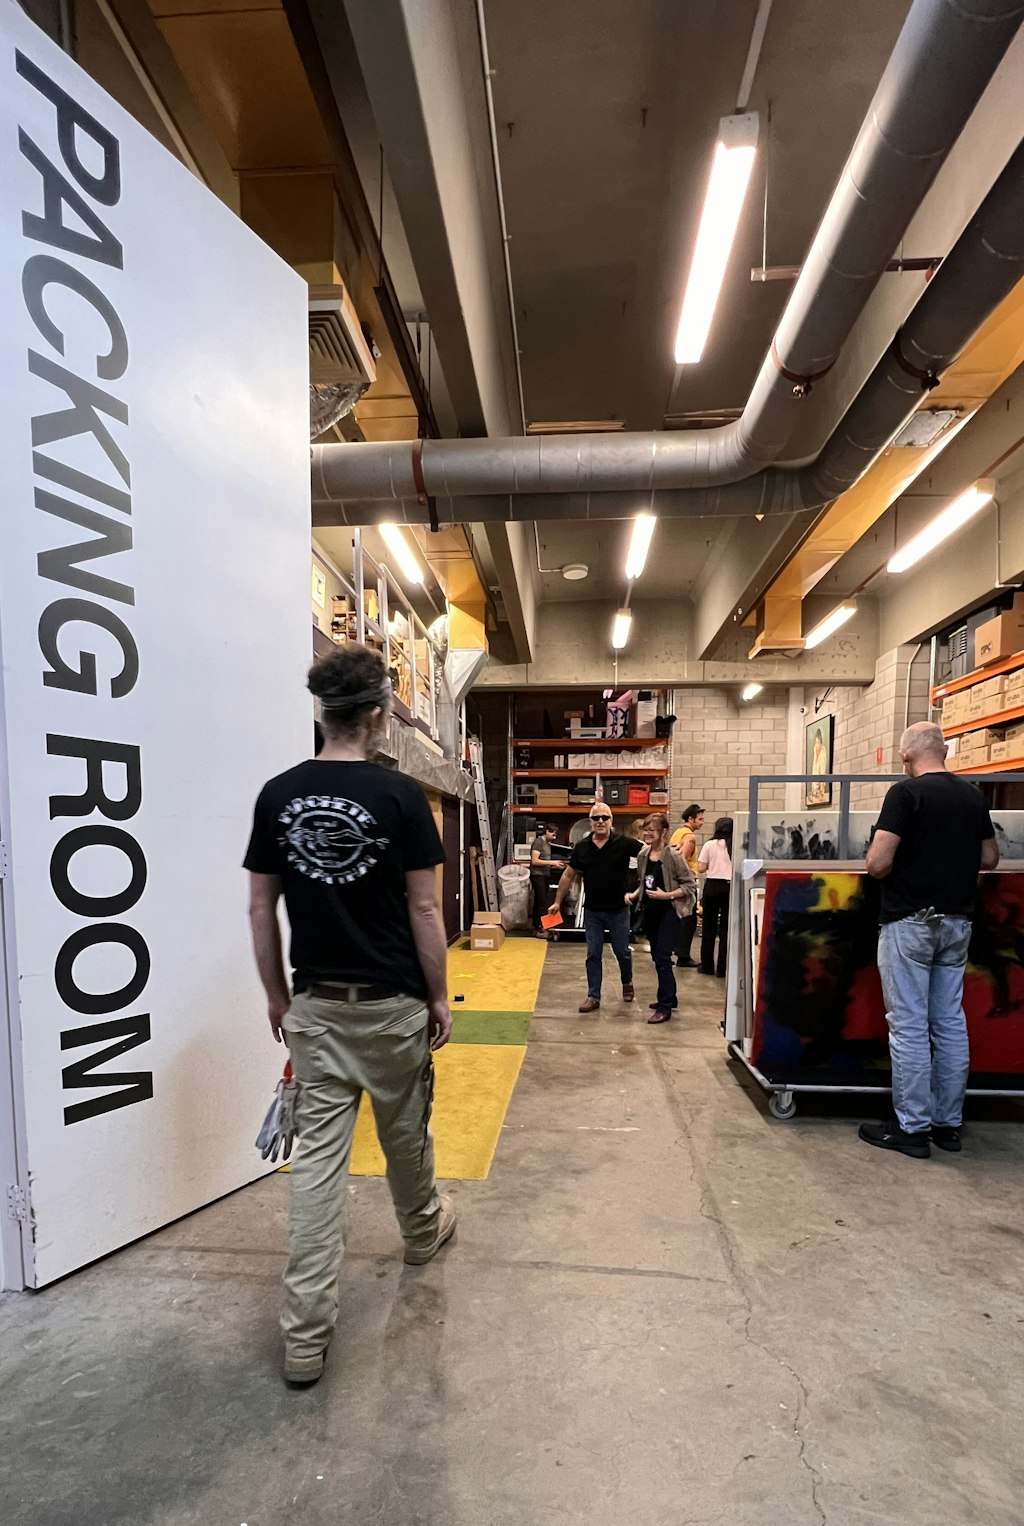 A person walks past a large 'Packing Room' sign into a working space with people, equipment and stored items